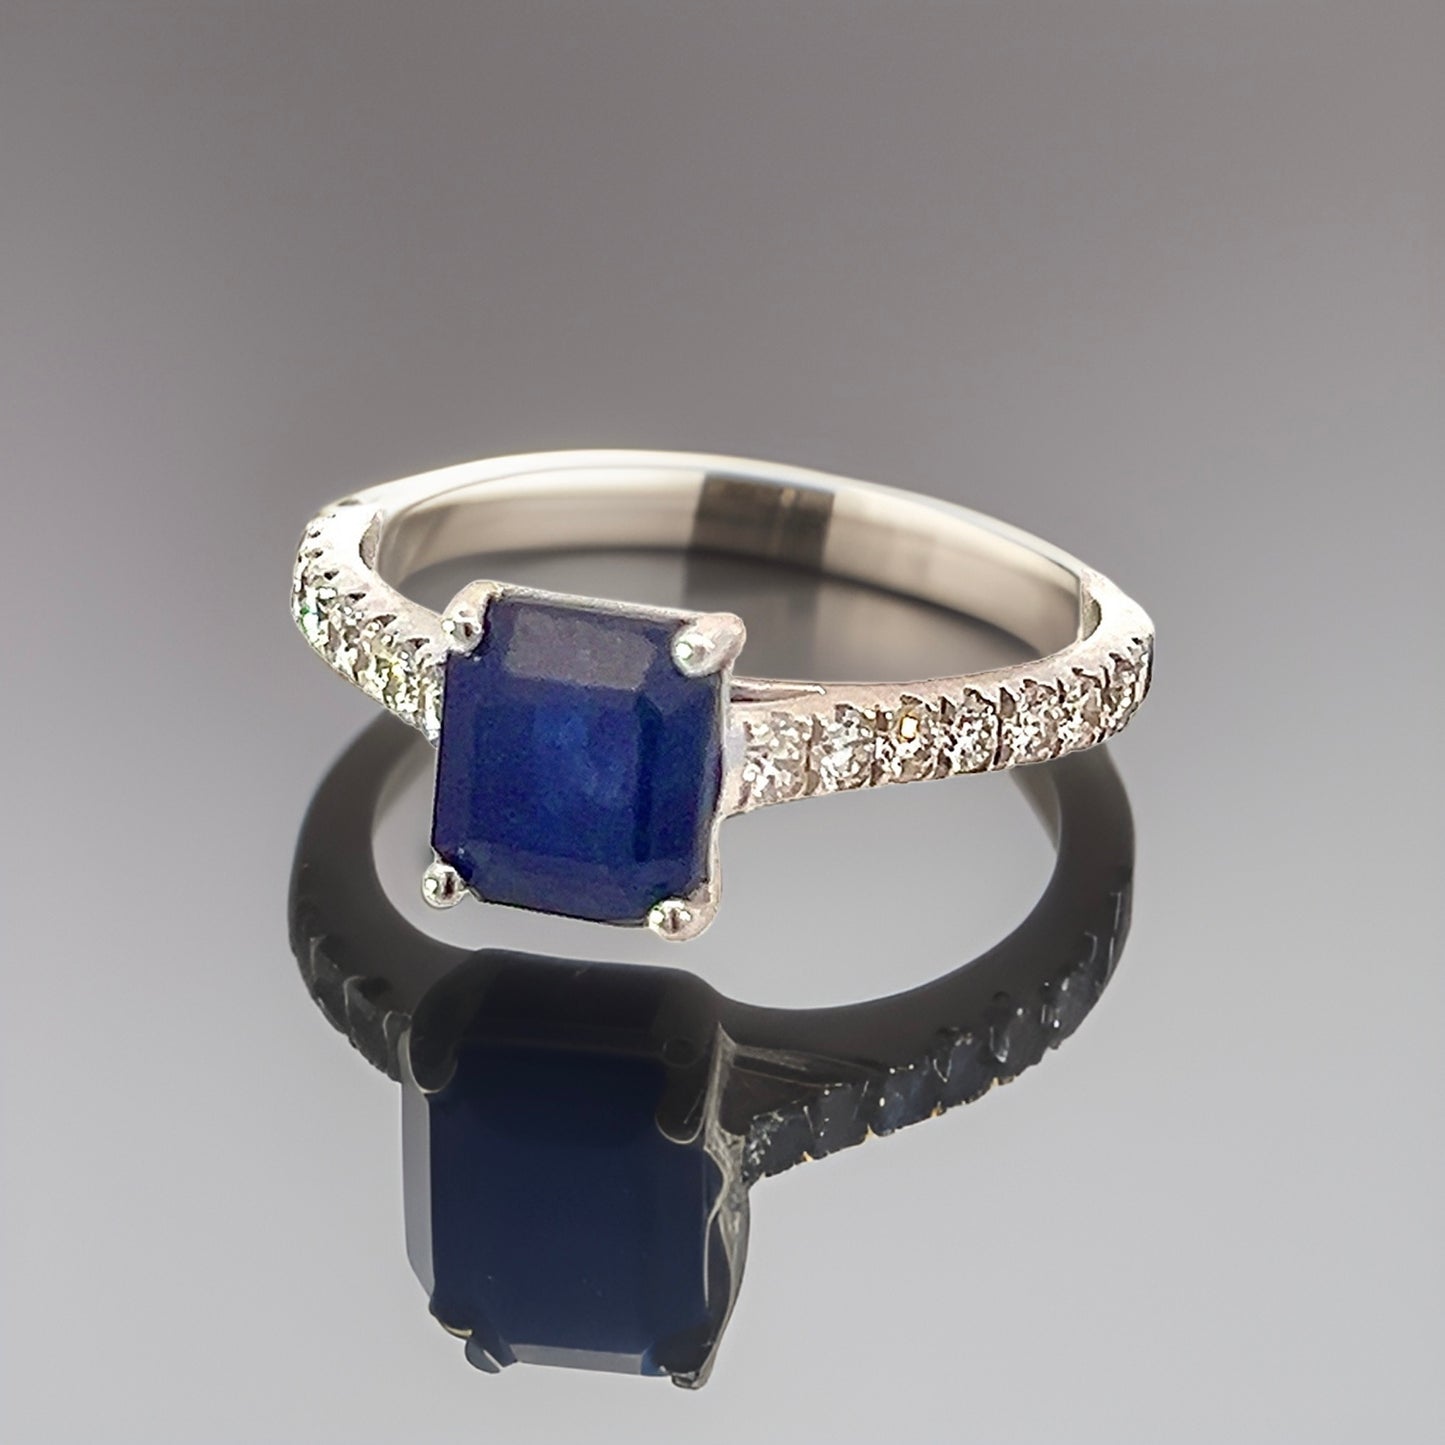 Natural Sapphire Diamond Ring 6.5 14k White Gold 2.17 TCW Certified $3,950 310587